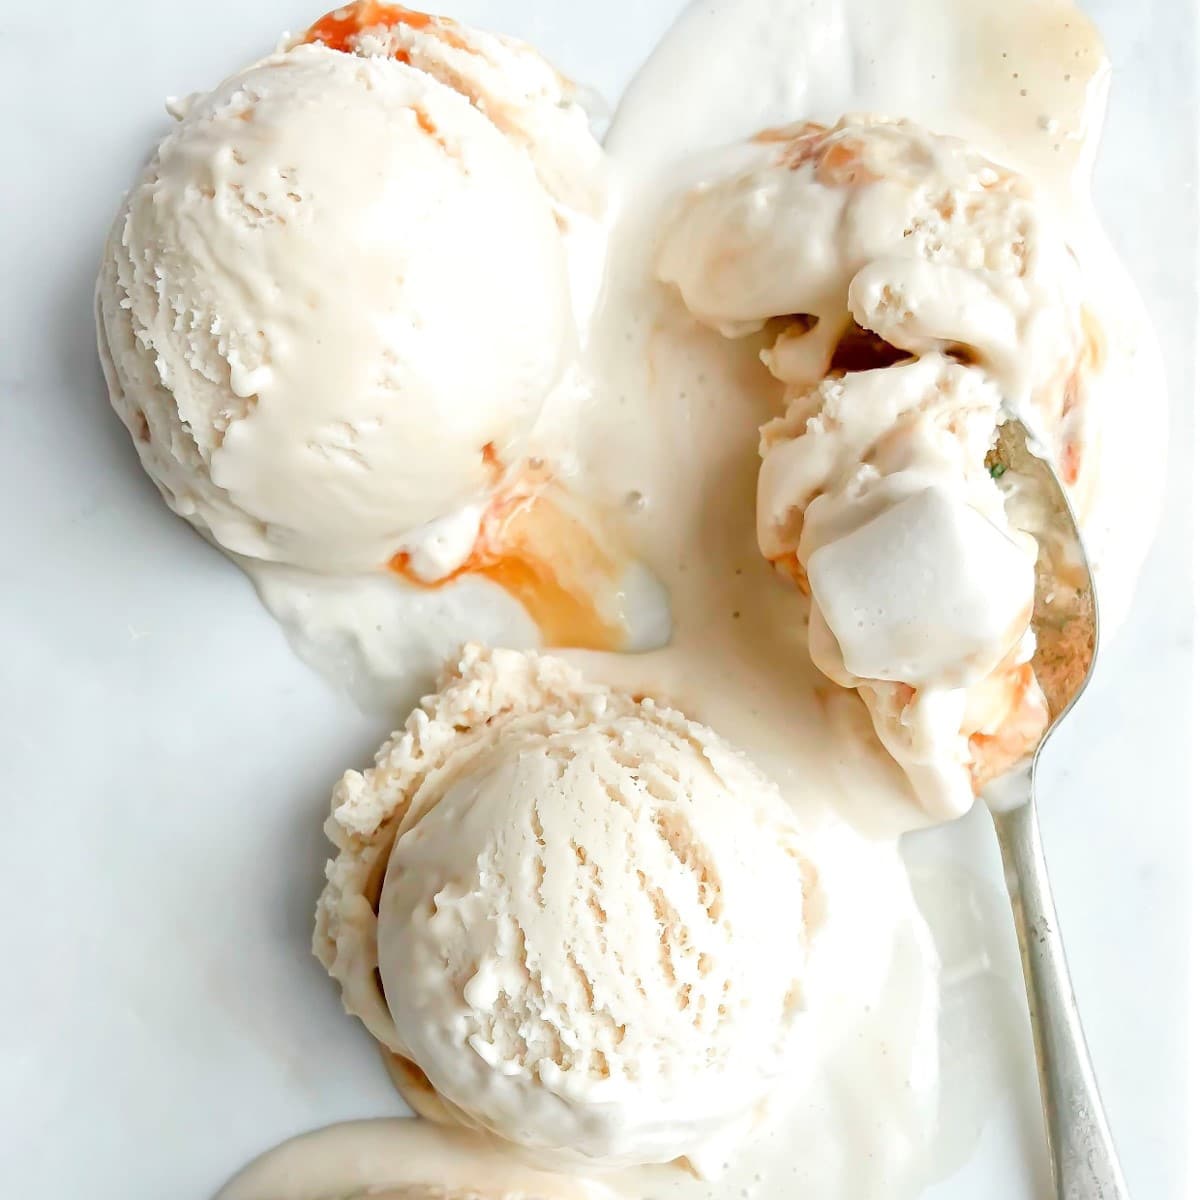 Philadelphia-style, homemade cereal milk ice cream scoops with a spoon